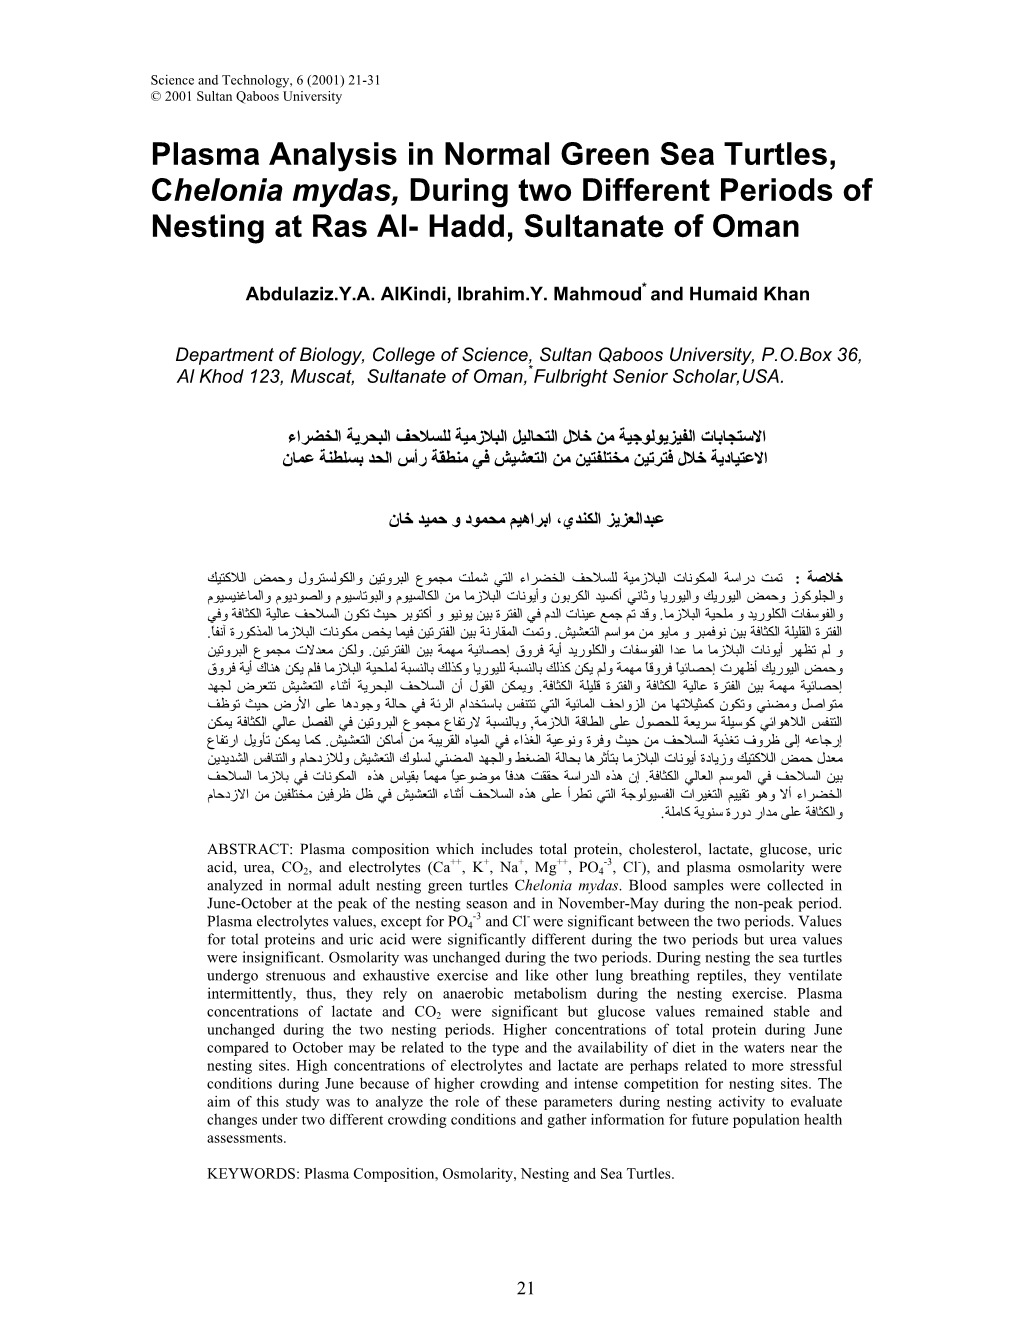 Plasma Analysis in Normal Green Sea Turtles, Chelonia Mydas, During Two Different Periods of Nesting at Ras Al- Hadd, Sultanate of Oman